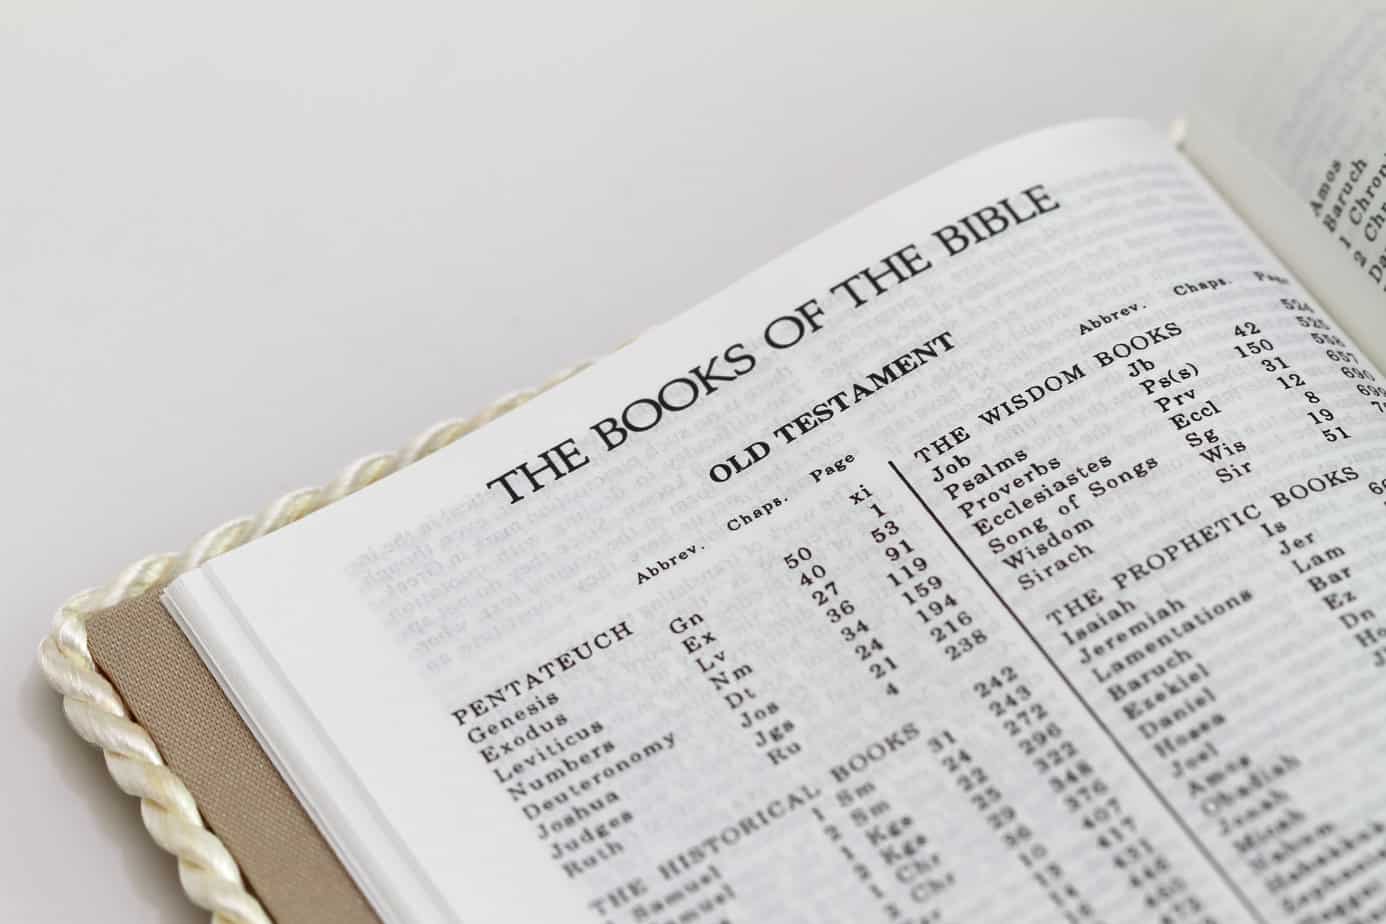 66 Books of The Bible In Order: Who, What, When, Where